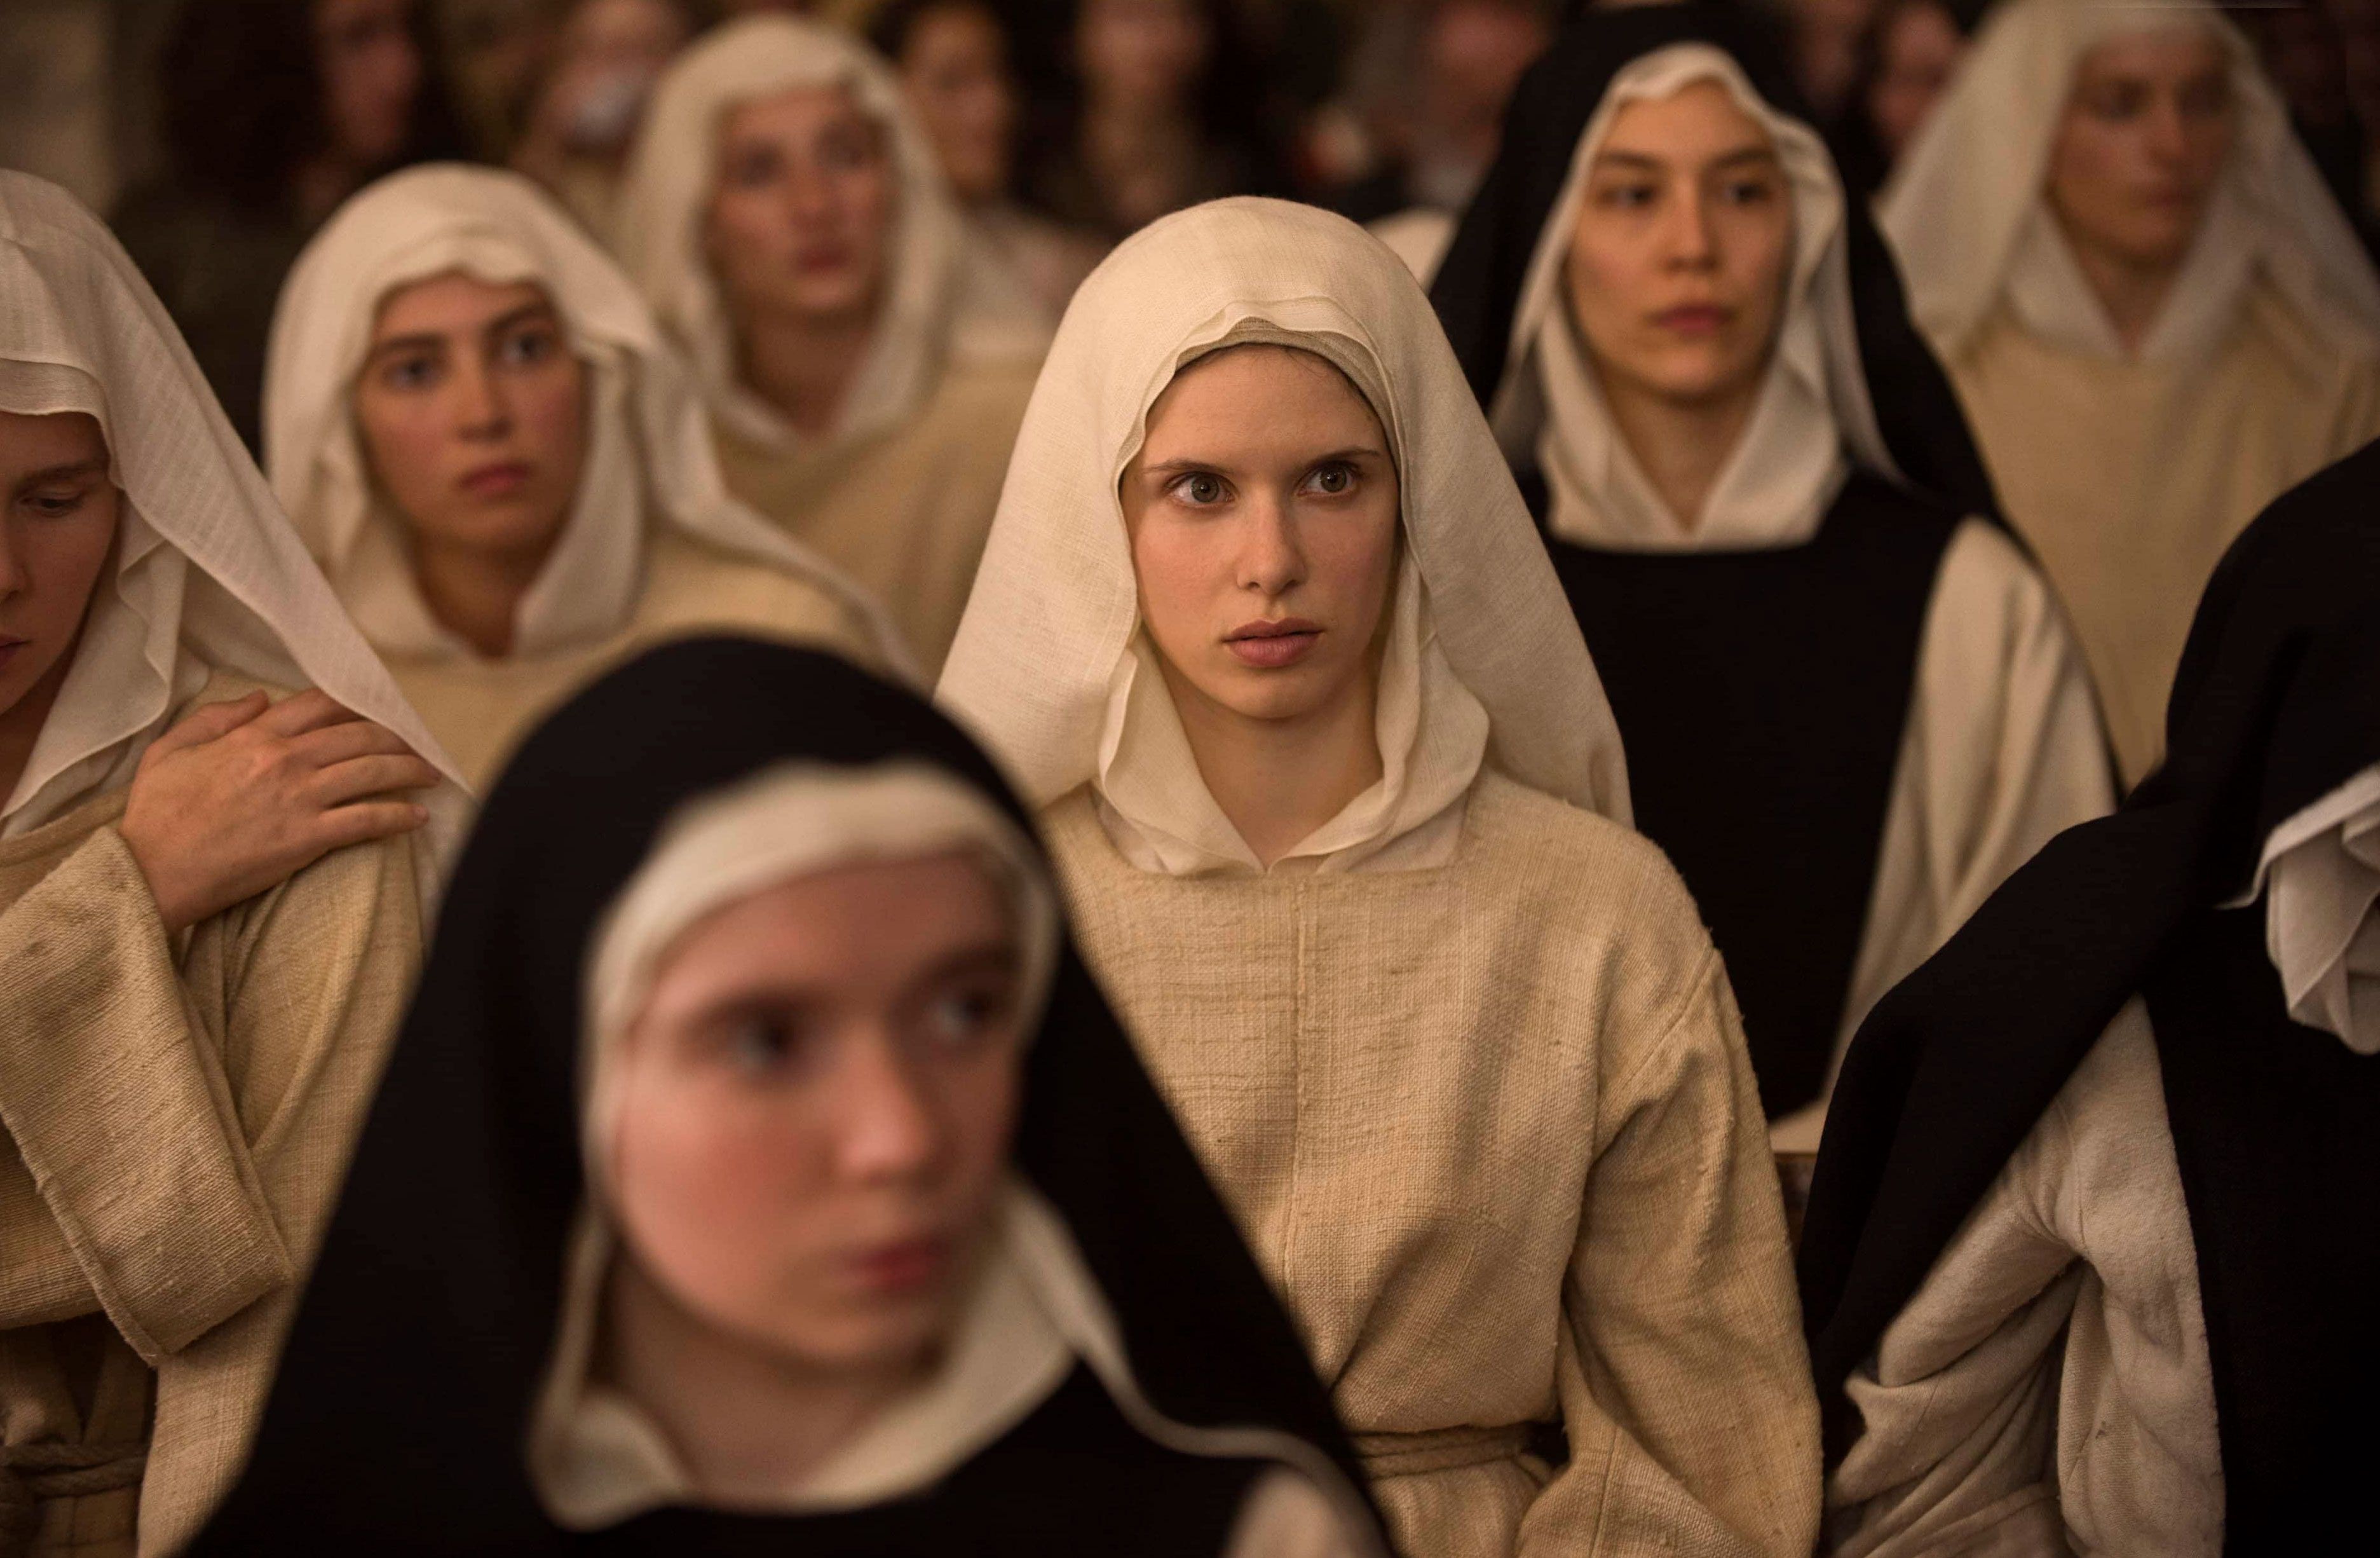 Wildest Moments from the Nunsploitation Movie Benedetta pic